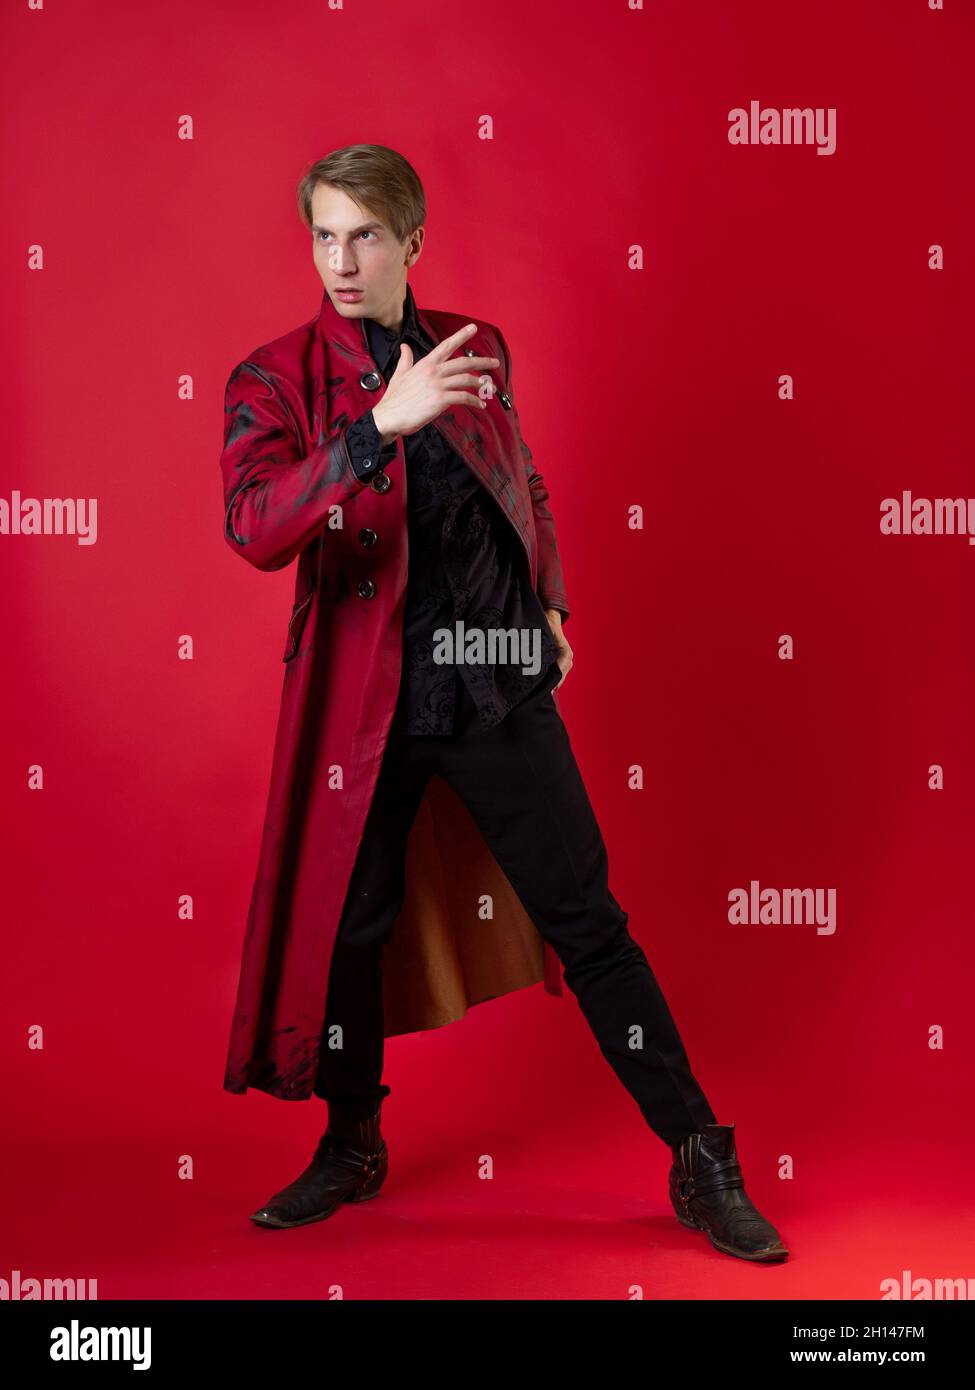 An outrageous young man in a daring red coat in a vintage noir style, photo on a red background Stock Photo